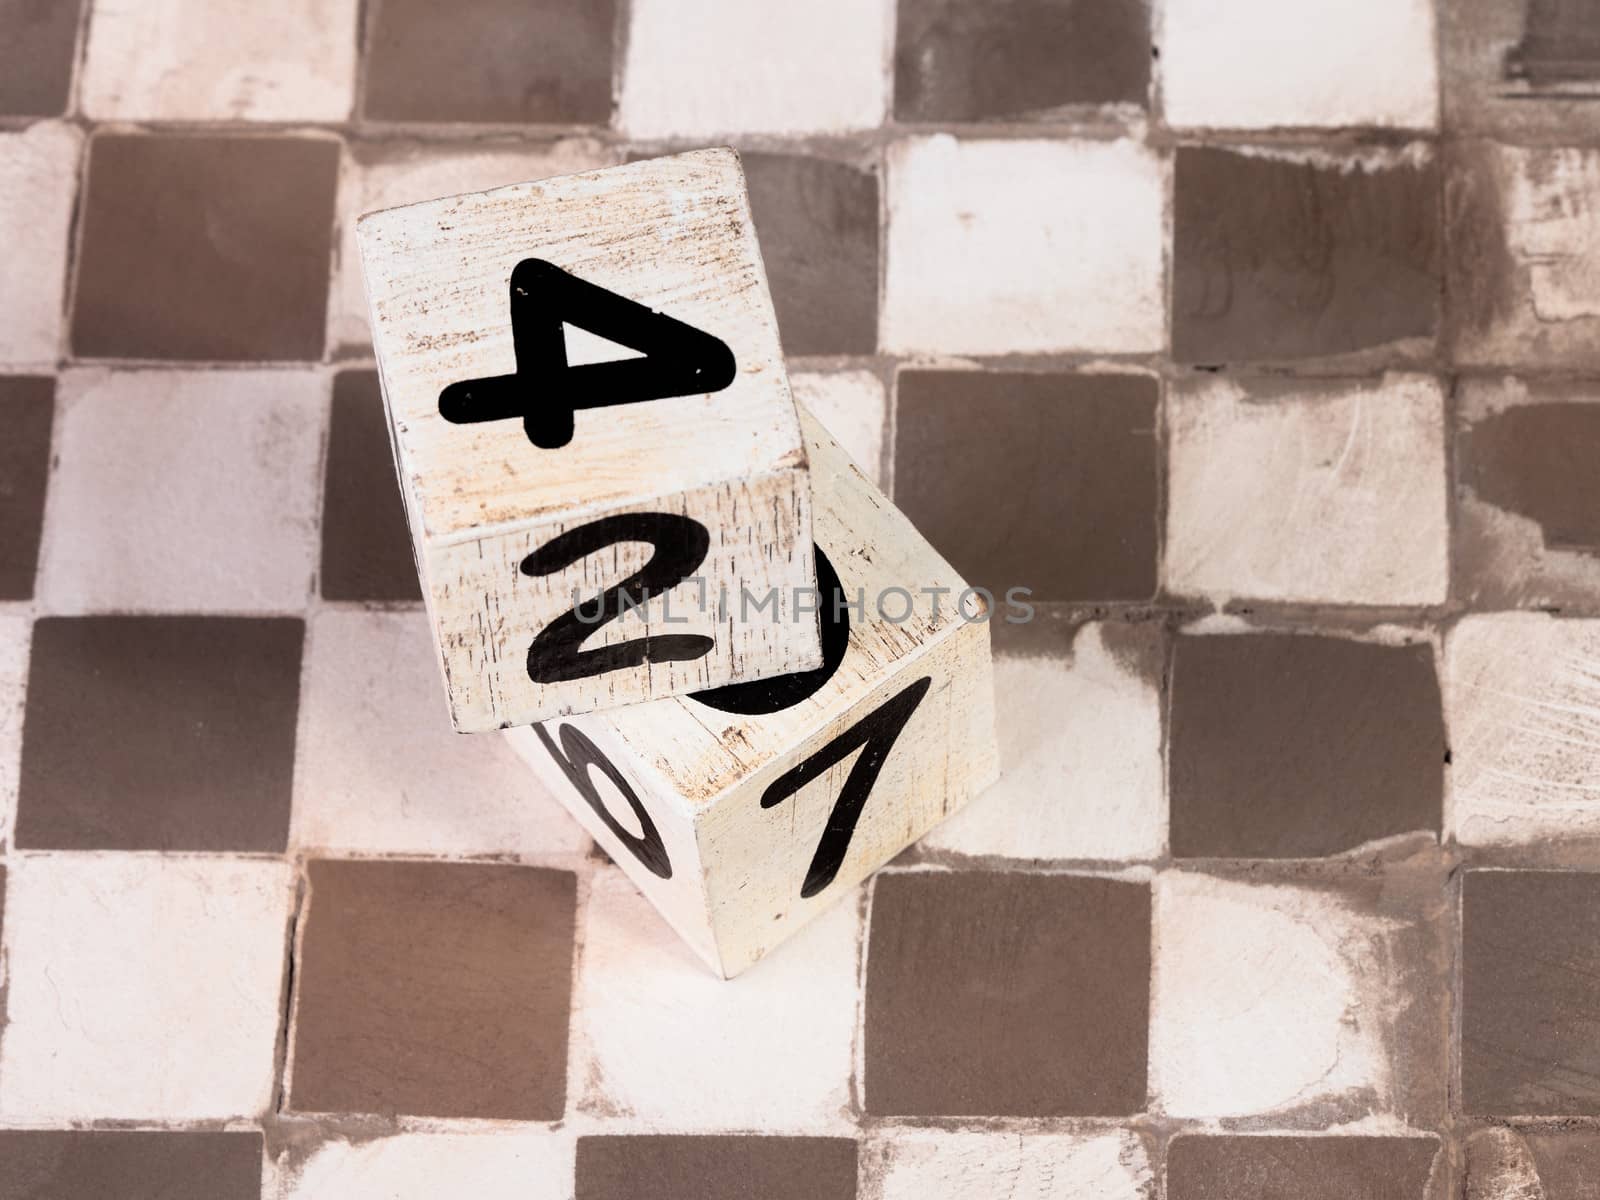 two dices on a tiles floor